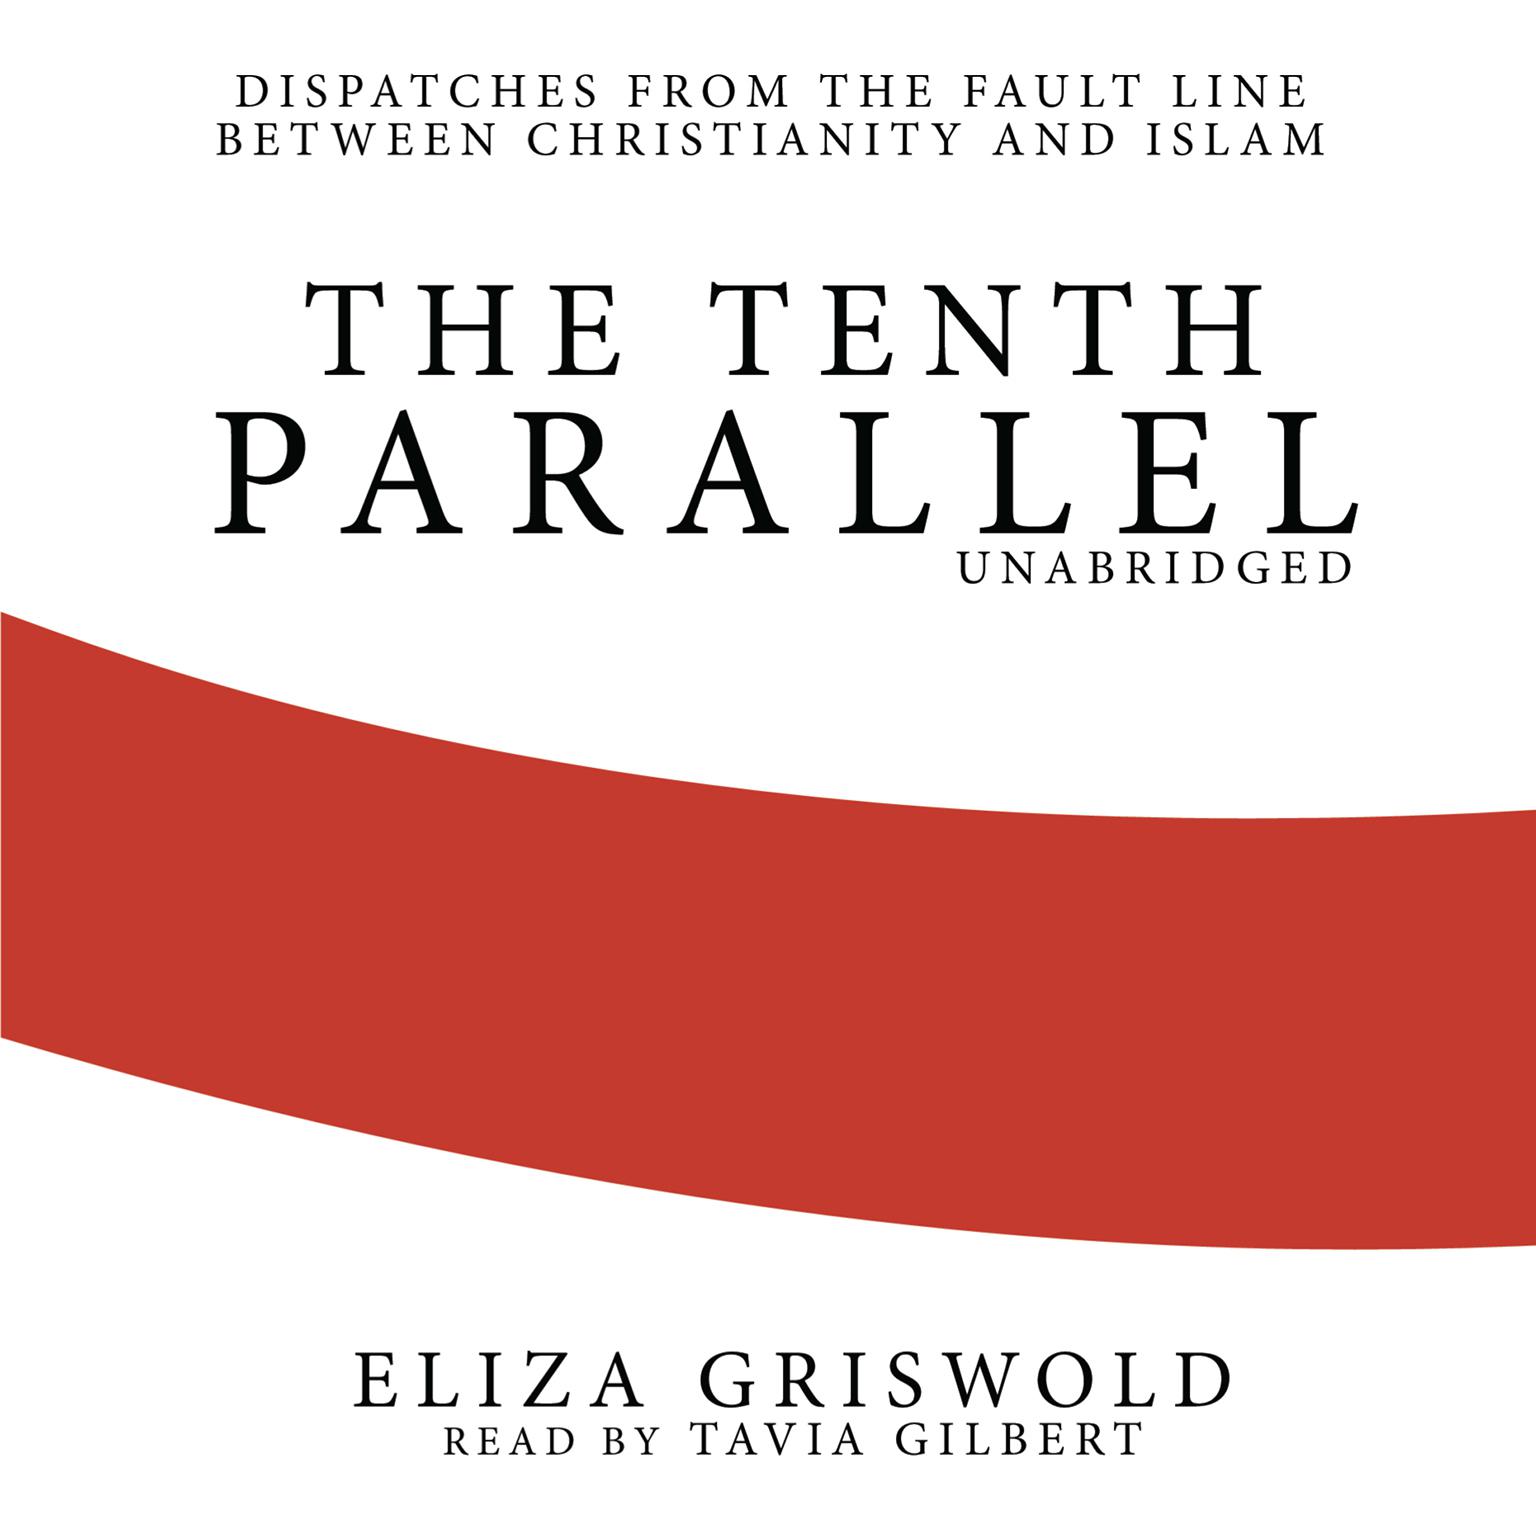 The Tenth Parallel: Dispatches from the Fault Line between Christianity and Islam Audiobook, by Eliza Griswold